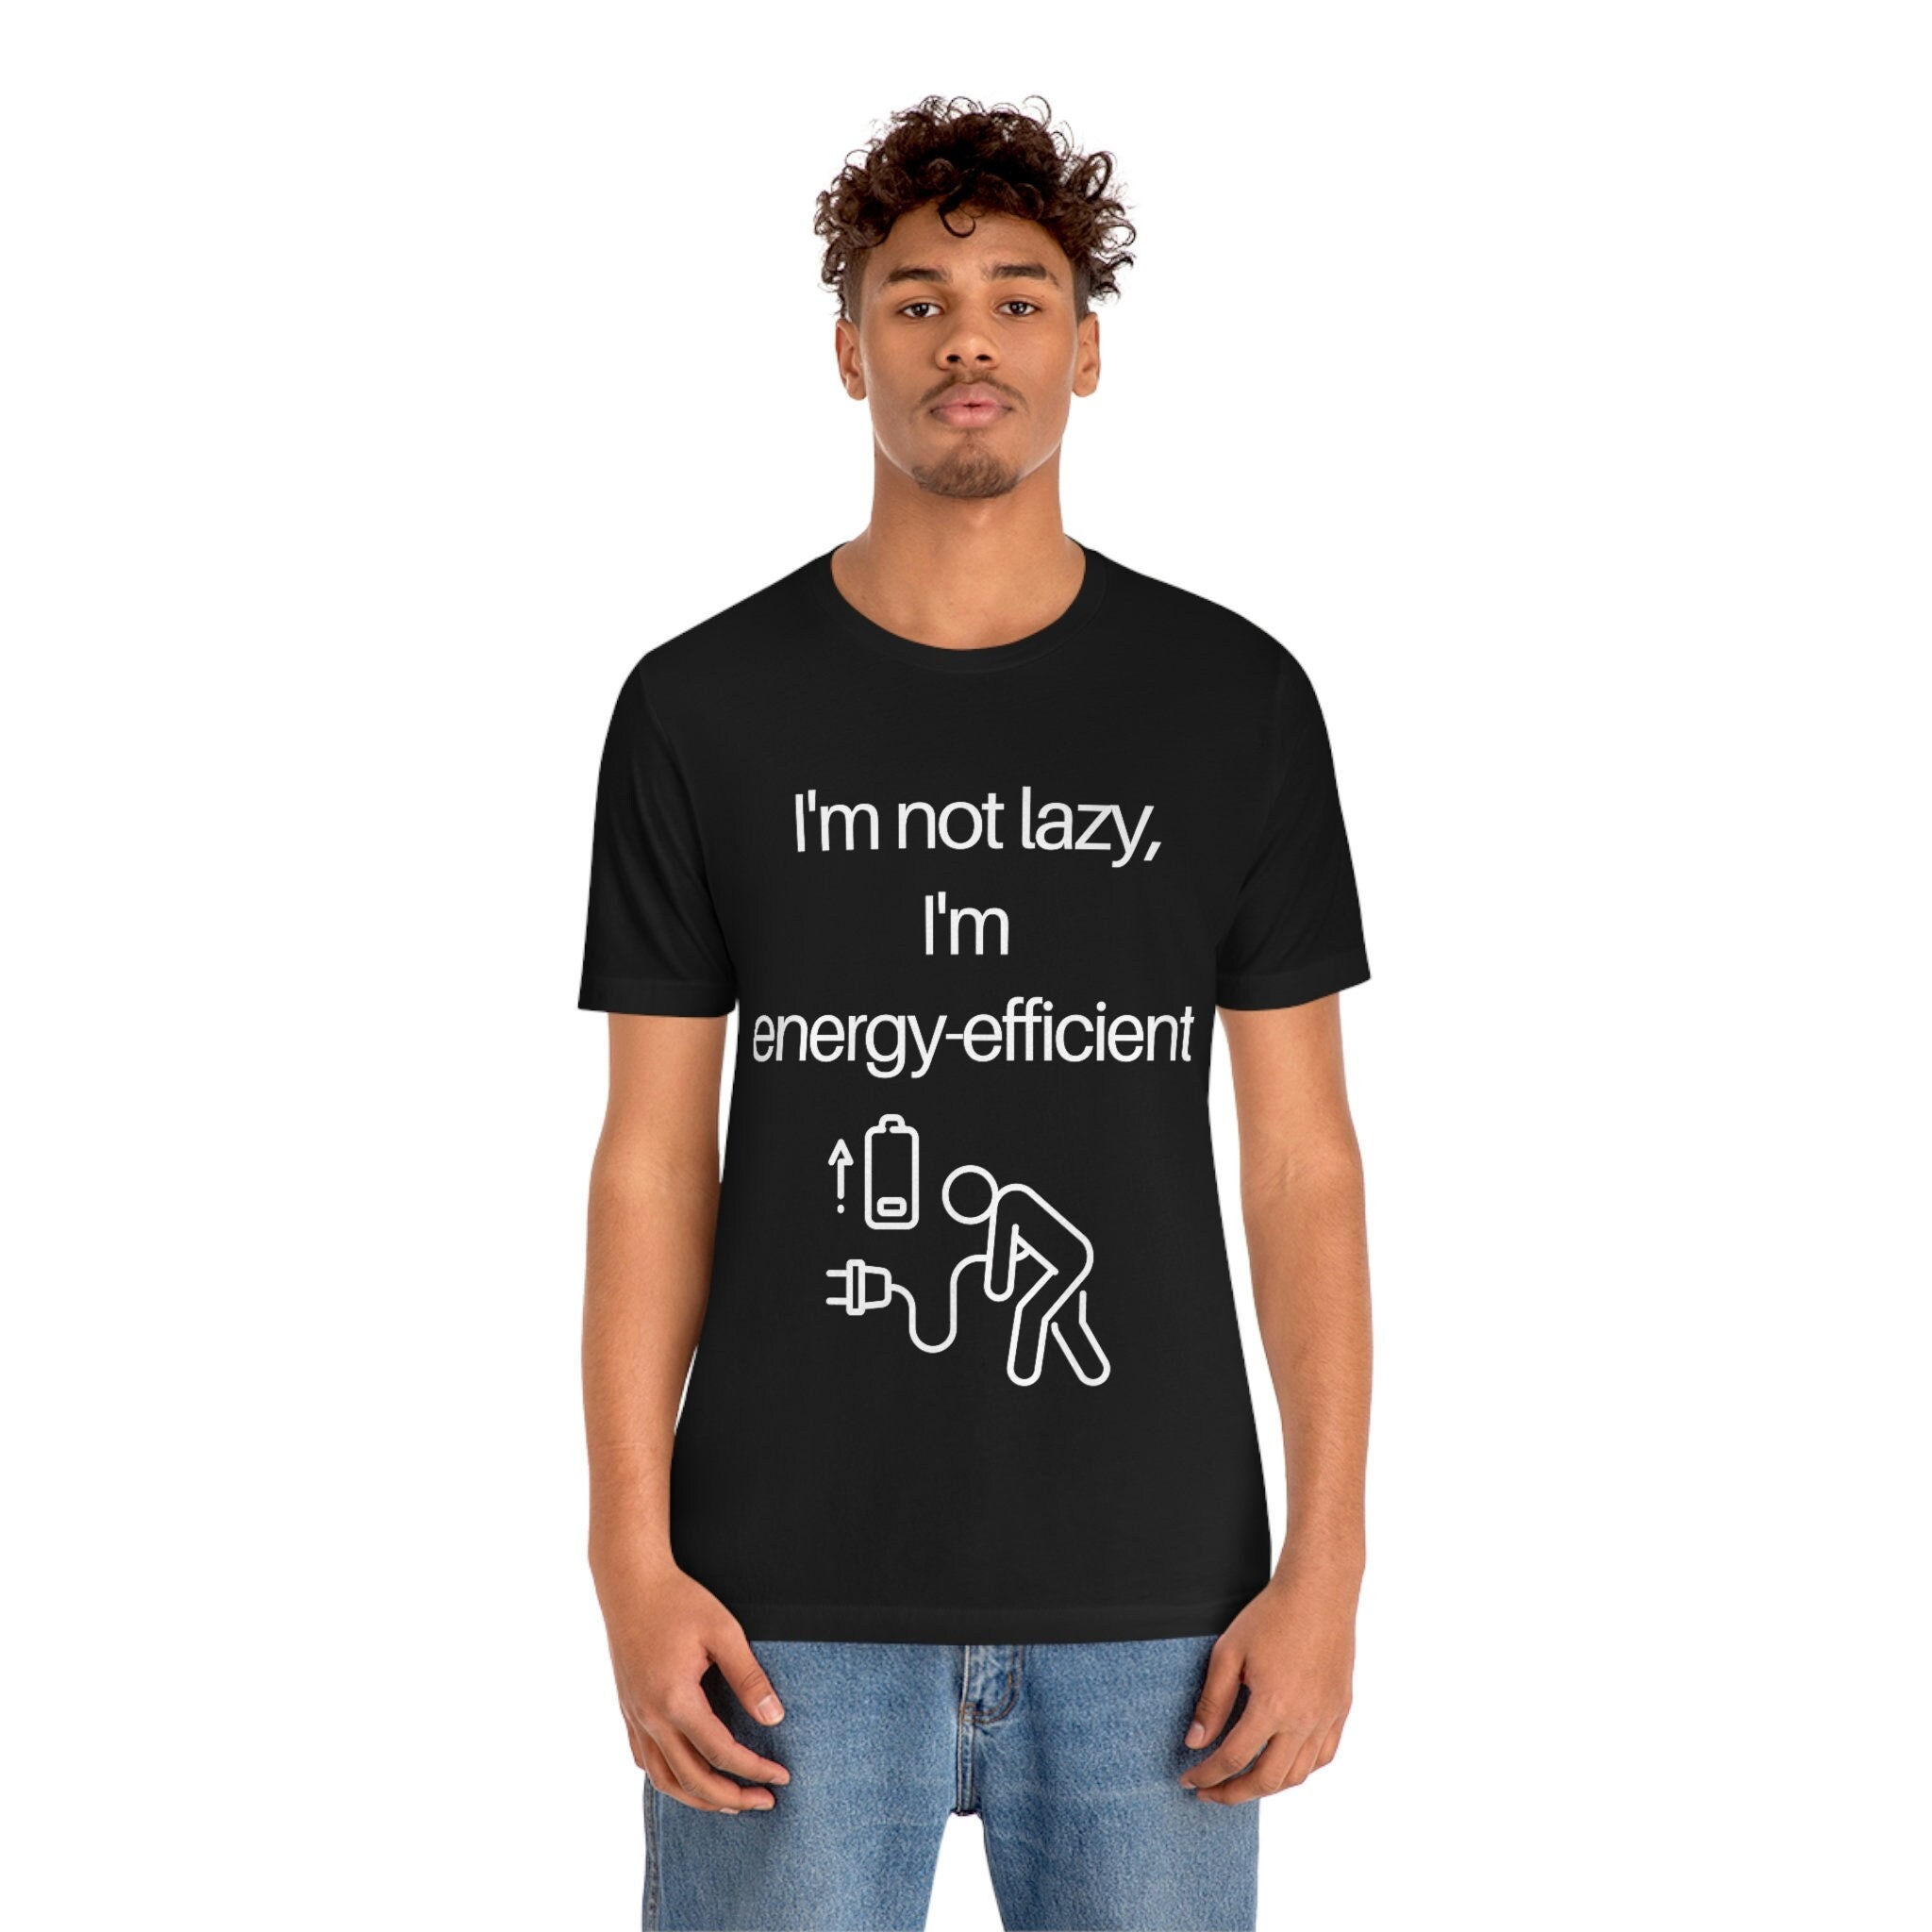 I'm Not Lollygagging, I'm Dilly-Dallying - Funny Lazy T-Shirt